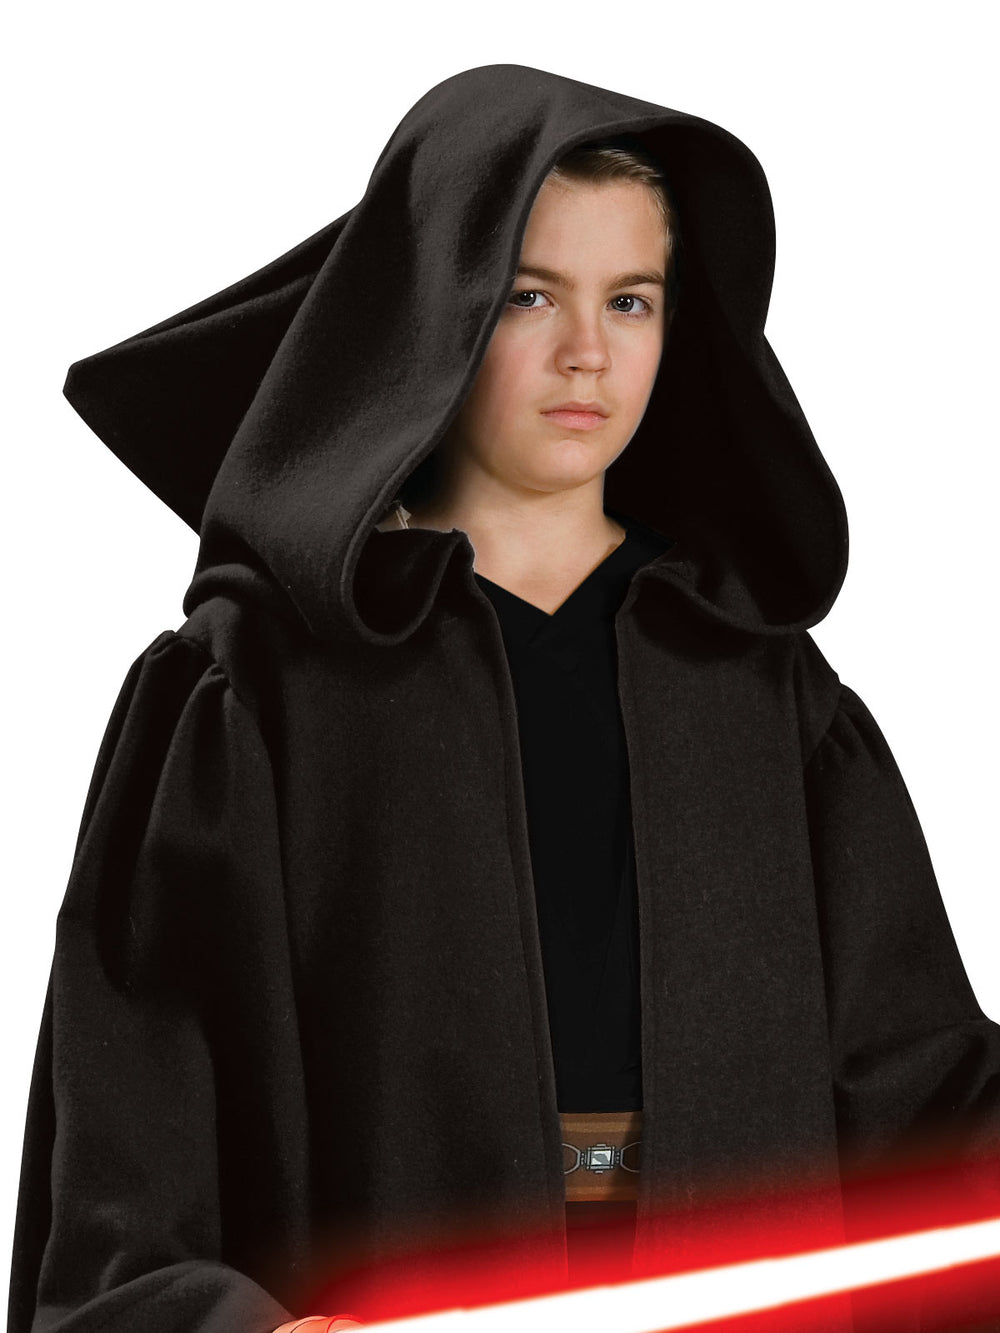 SITH HOODED ROBE DELUXE, CHILD - Little Shop of Horrors